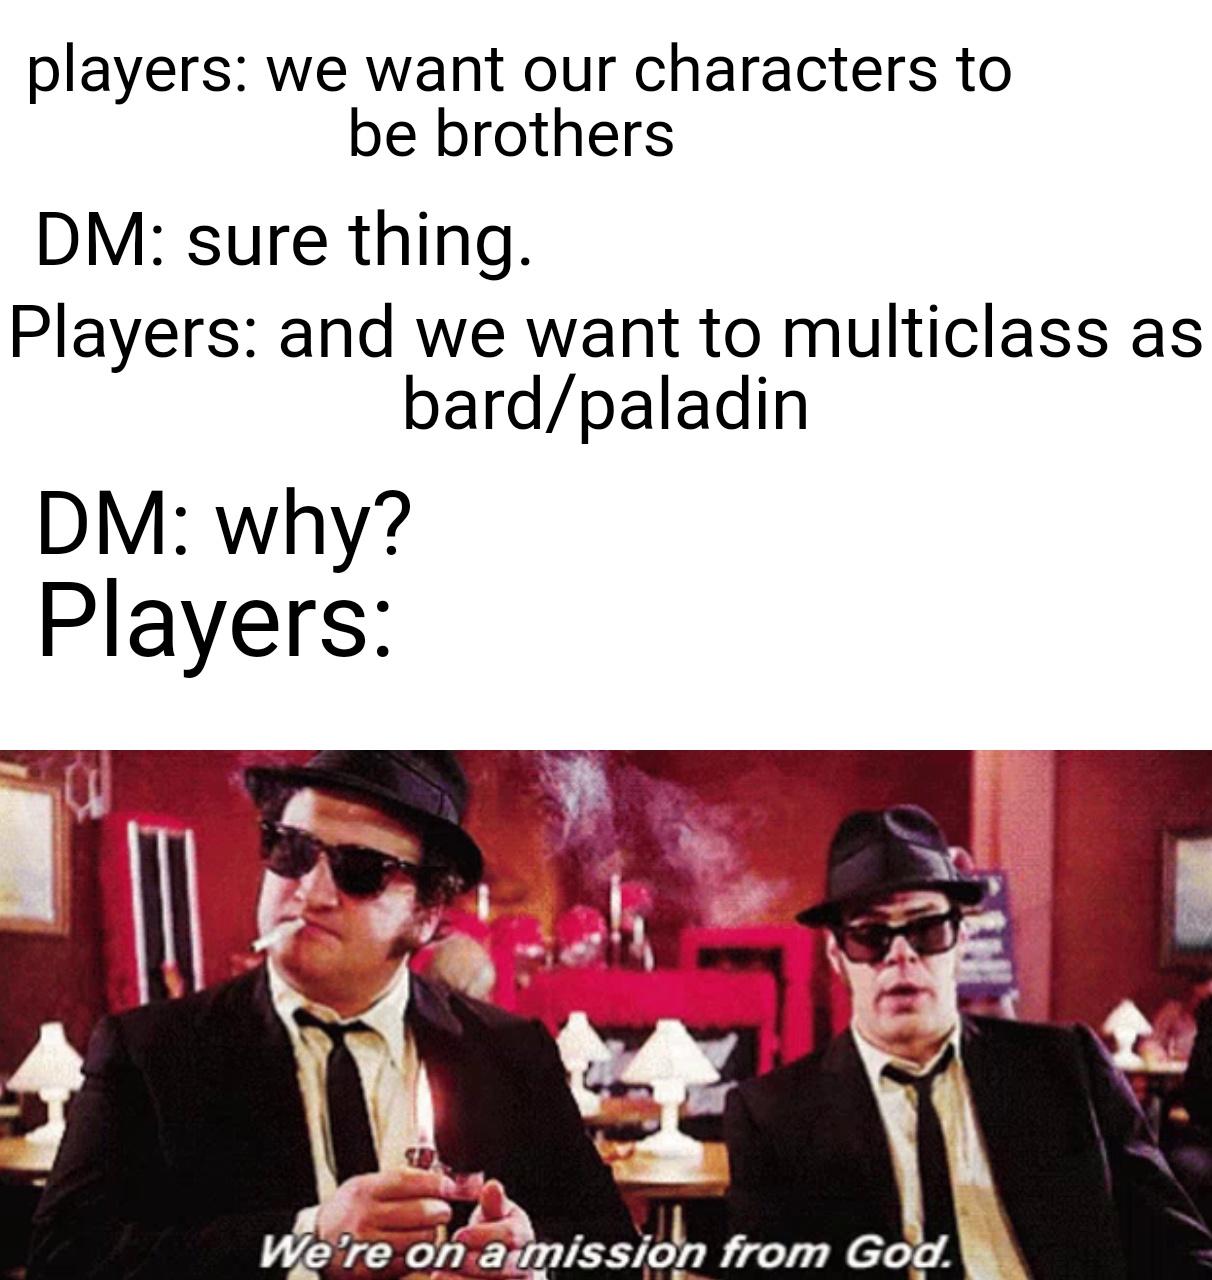 blues brothers movie - players we want our characters to be brothers Dm sure thing. Players and we want to multiclass as bardpaladin Dm why? Players We're on a mission from God.